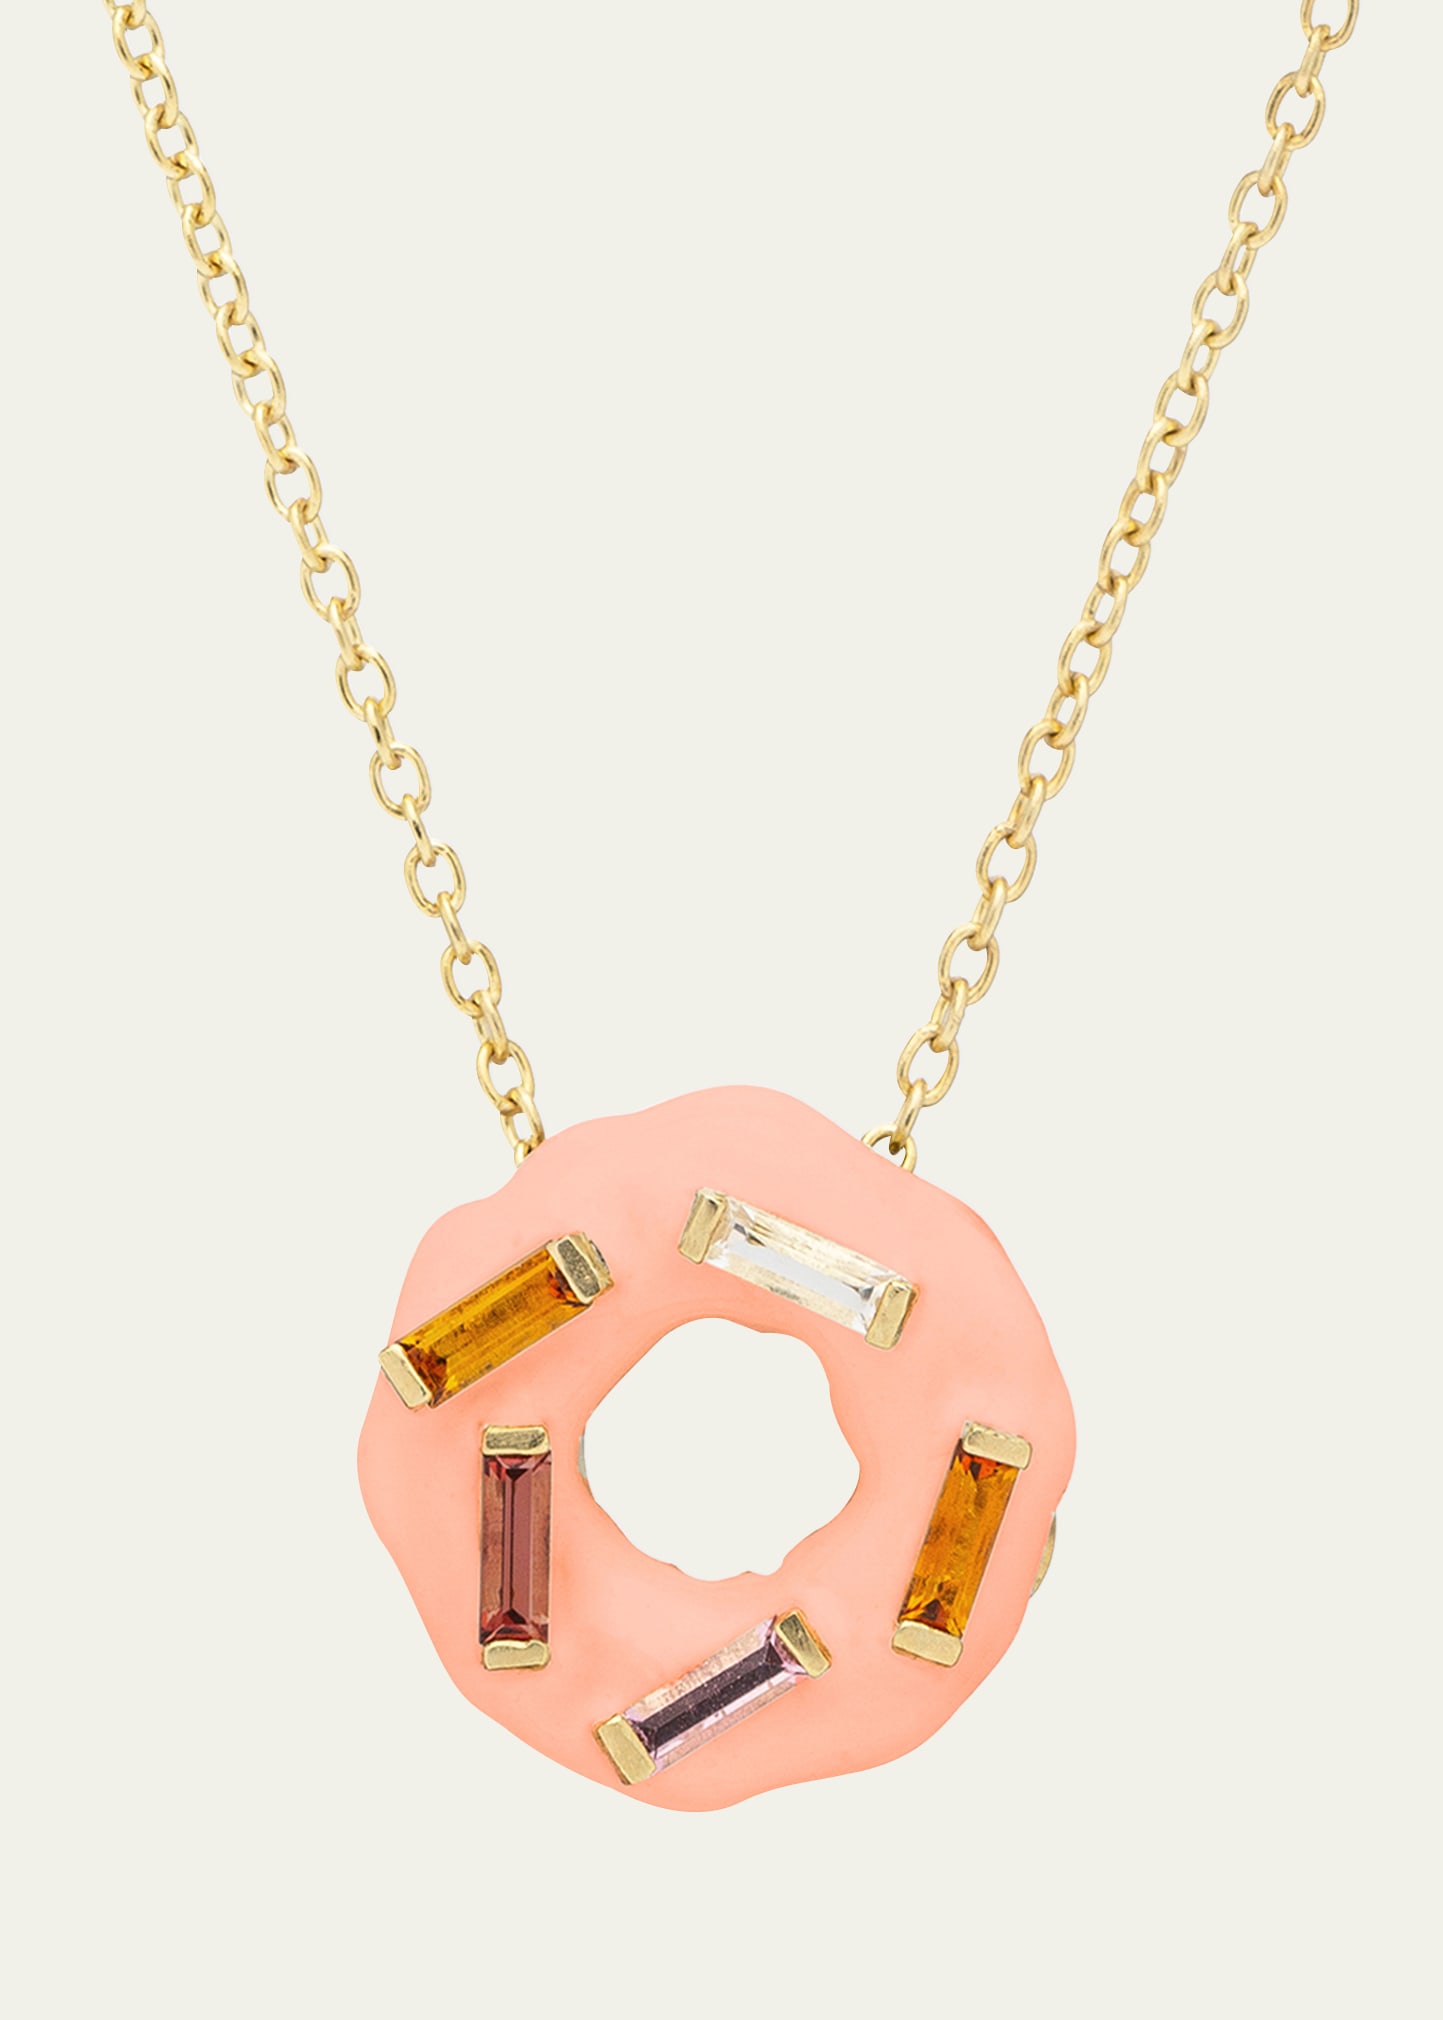 Donut with Sprinkles Necklace